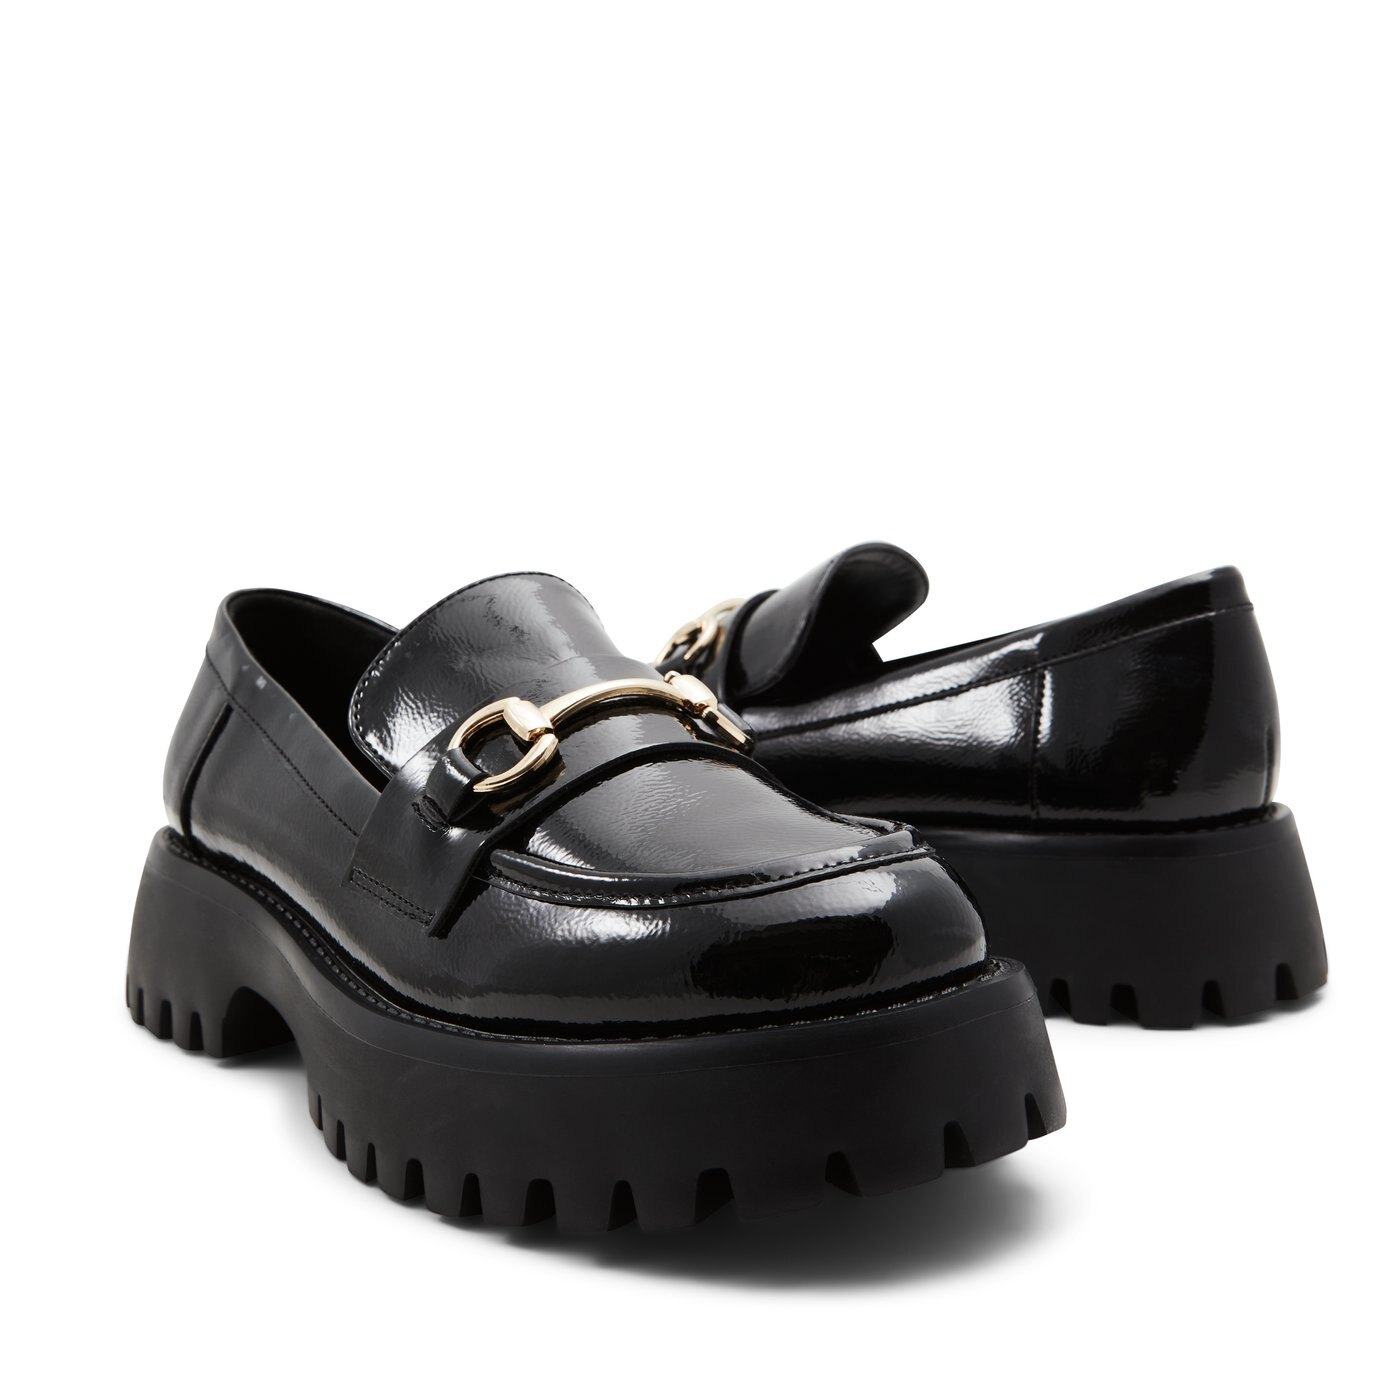 Cluelesss Black Synthetic Patent Women's Loafers | Call It Spring Canada